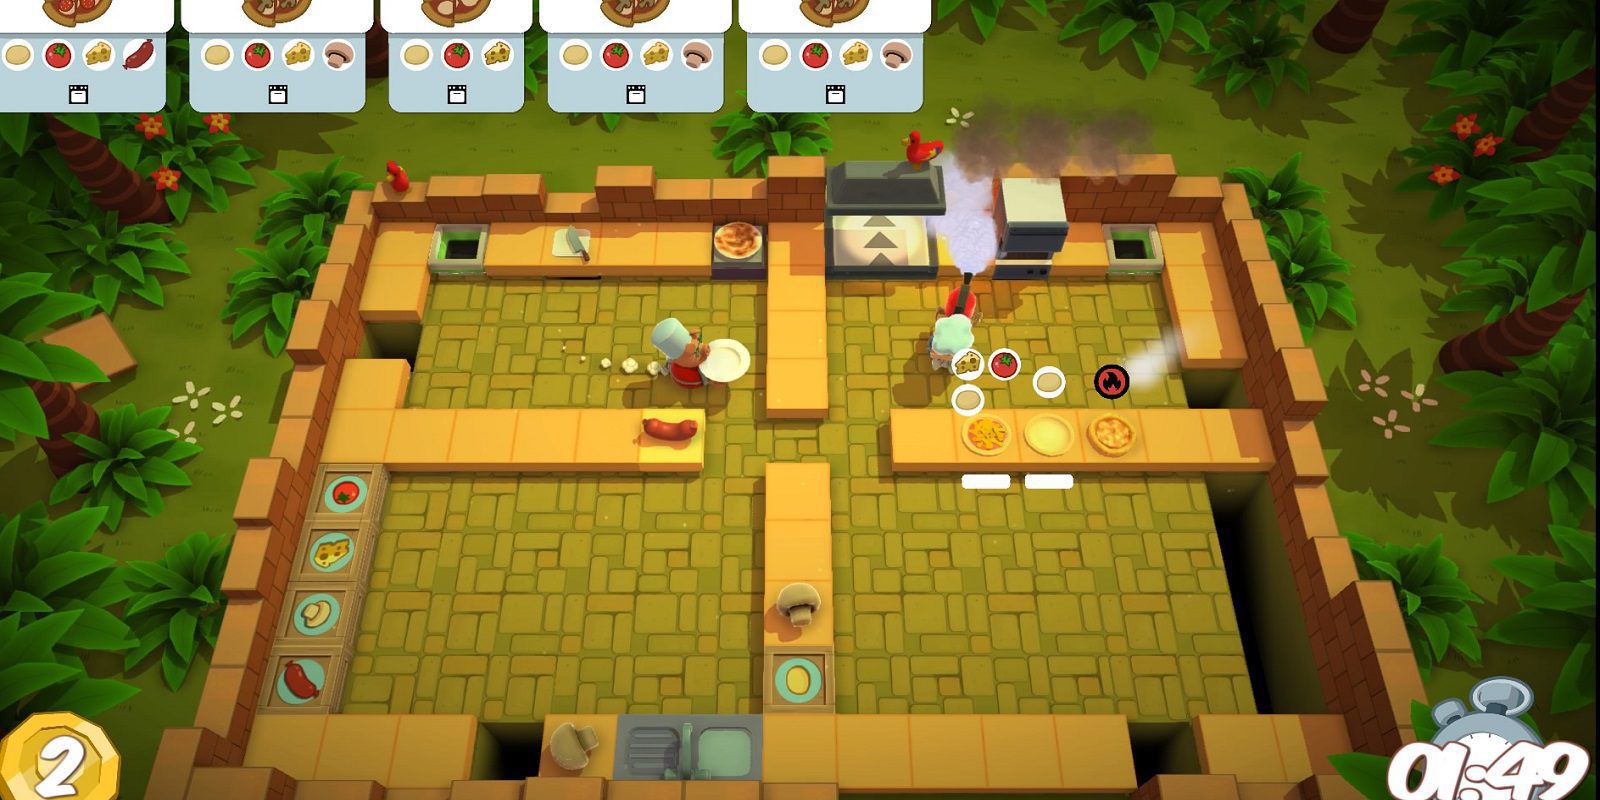 'The Escapists 2' y 'Overcooked' llegarán a Nintendo Switch muy pronto